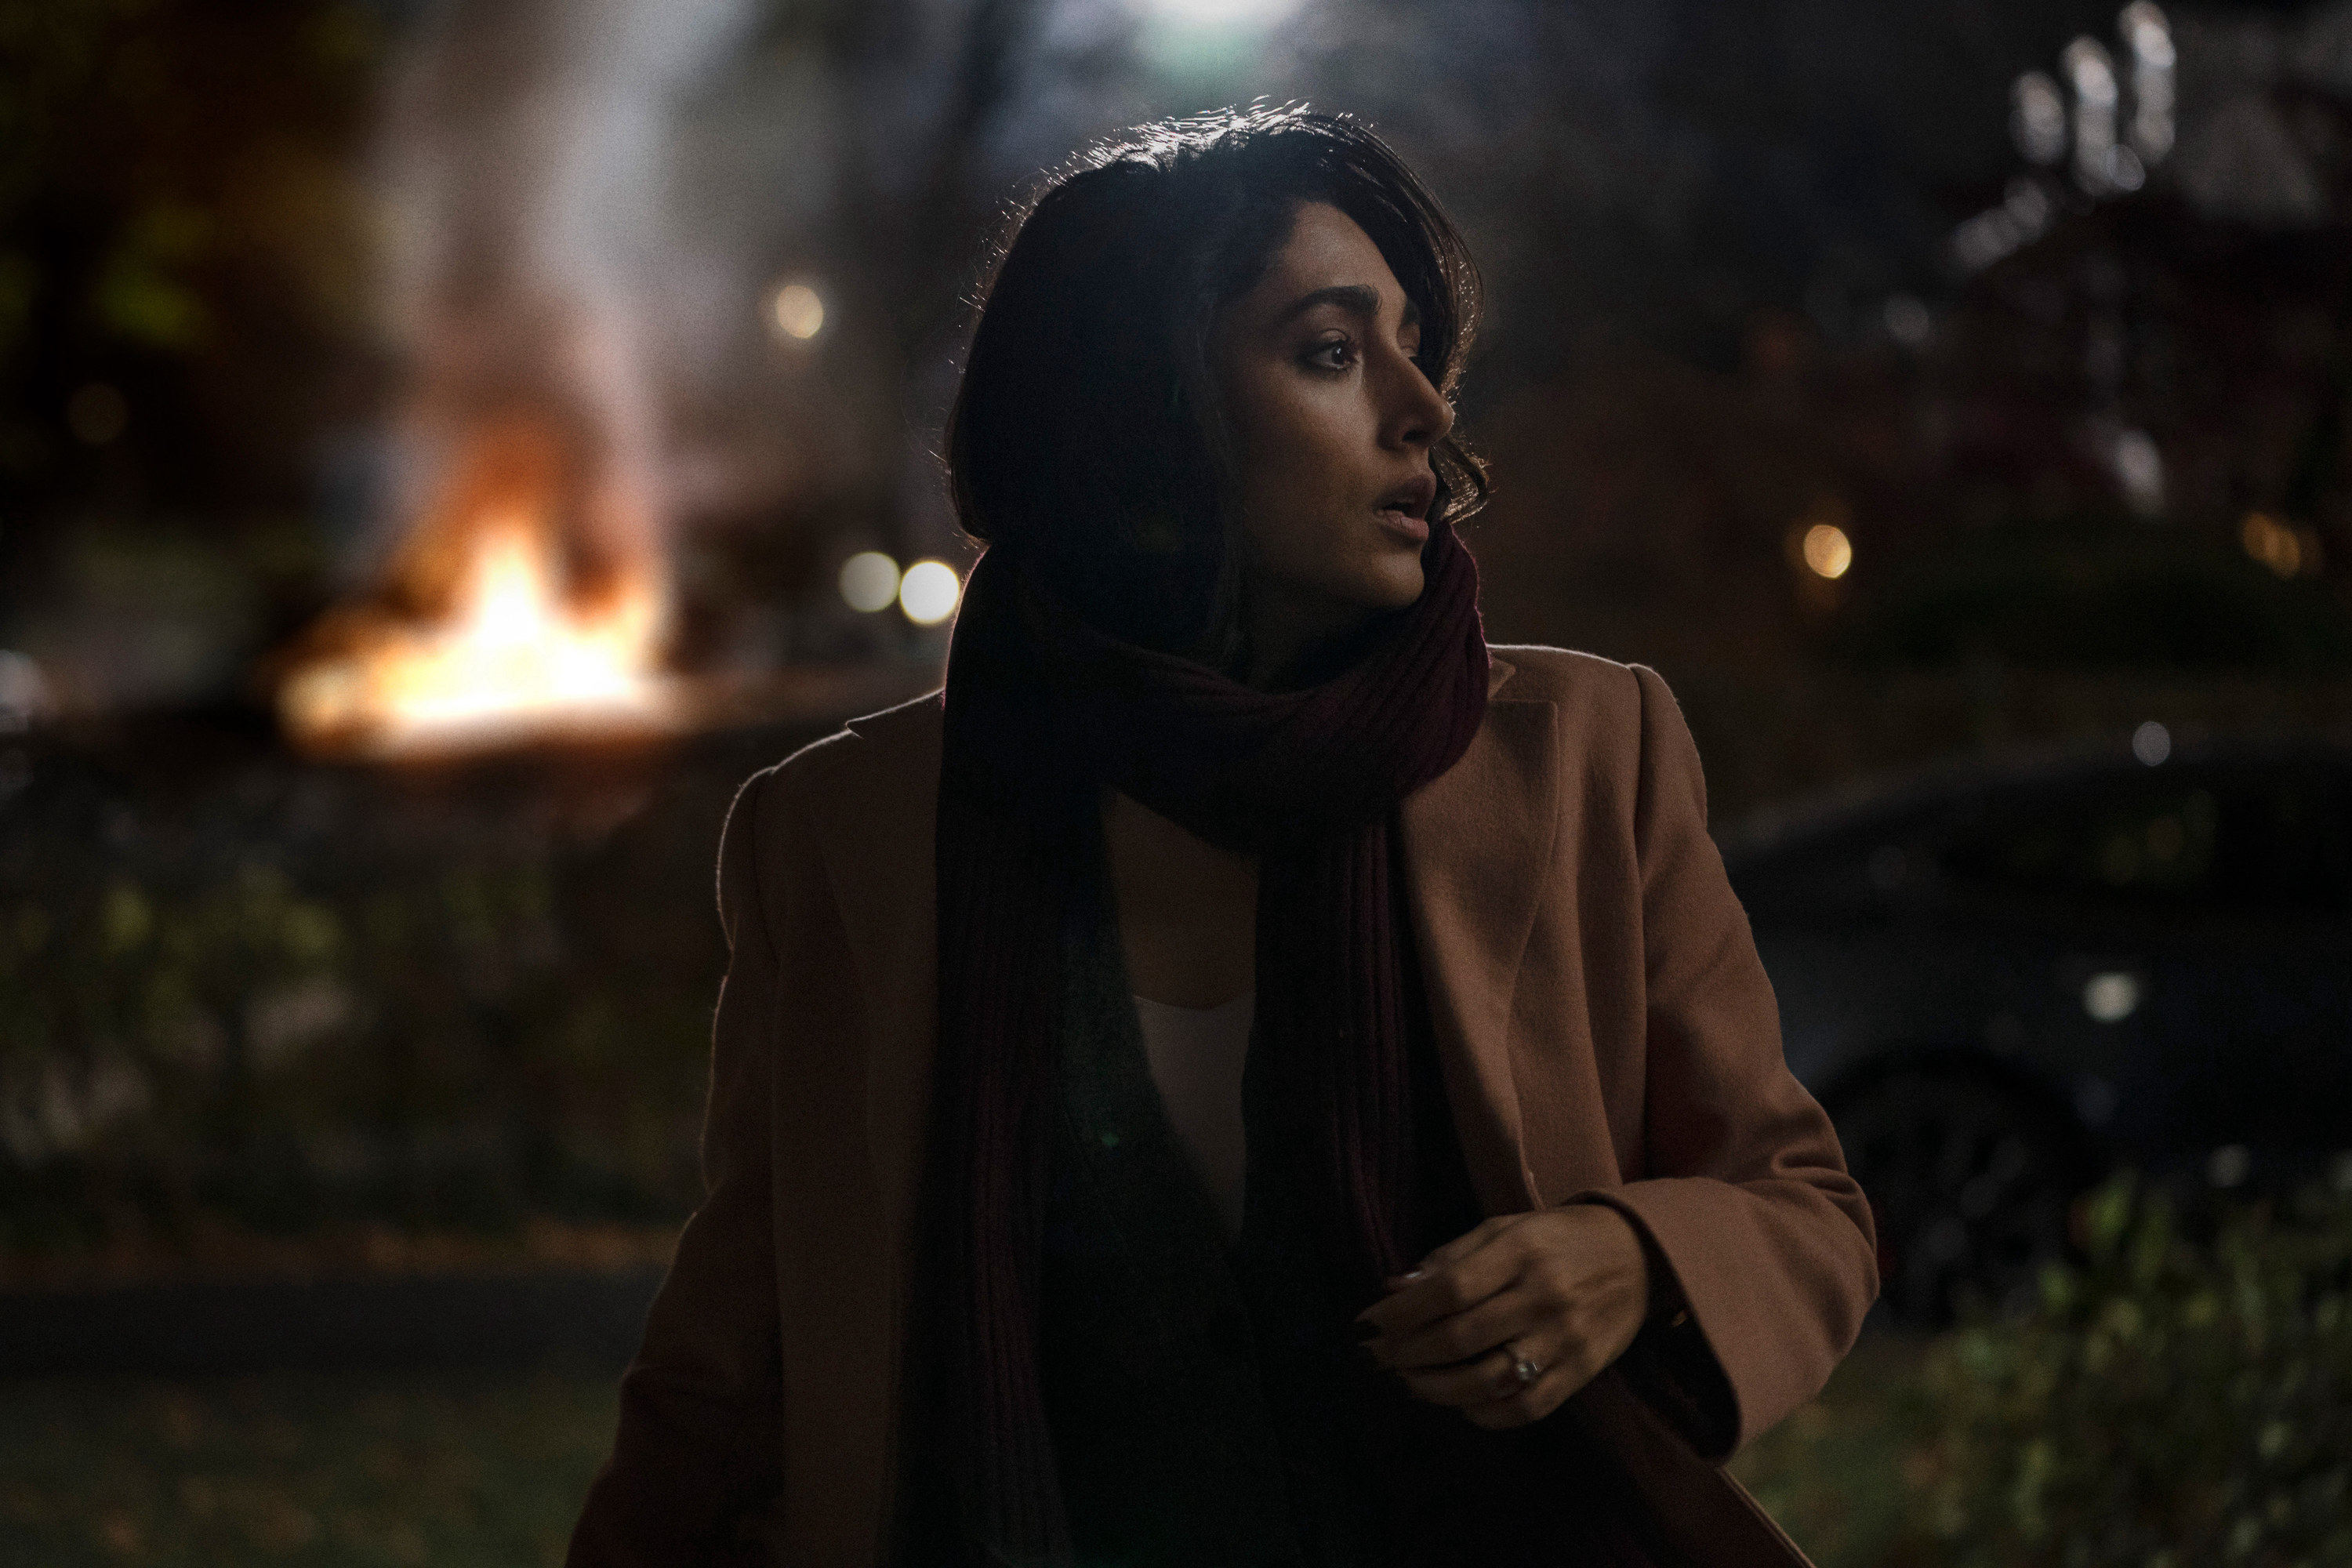 Golshiftah Farahani looks at something while a fire burns behind her